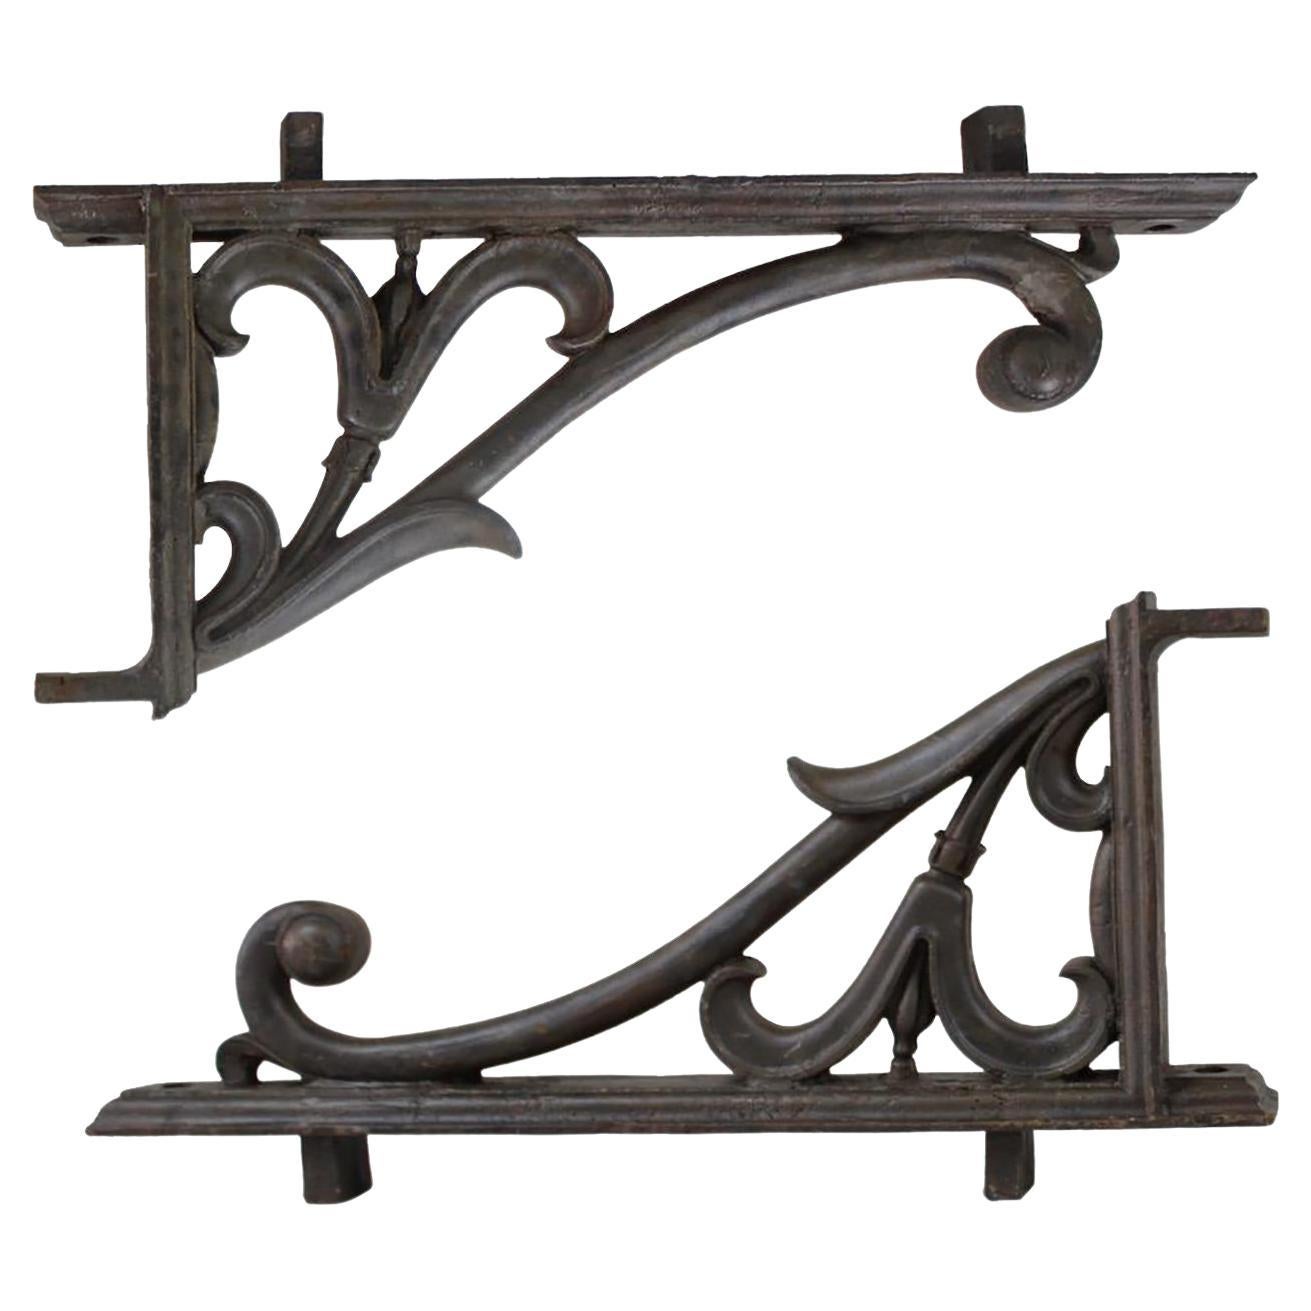 Pair of Mid-19th Century Greek Revival Cast Iron Scrolled Balcony Brackets For Sale